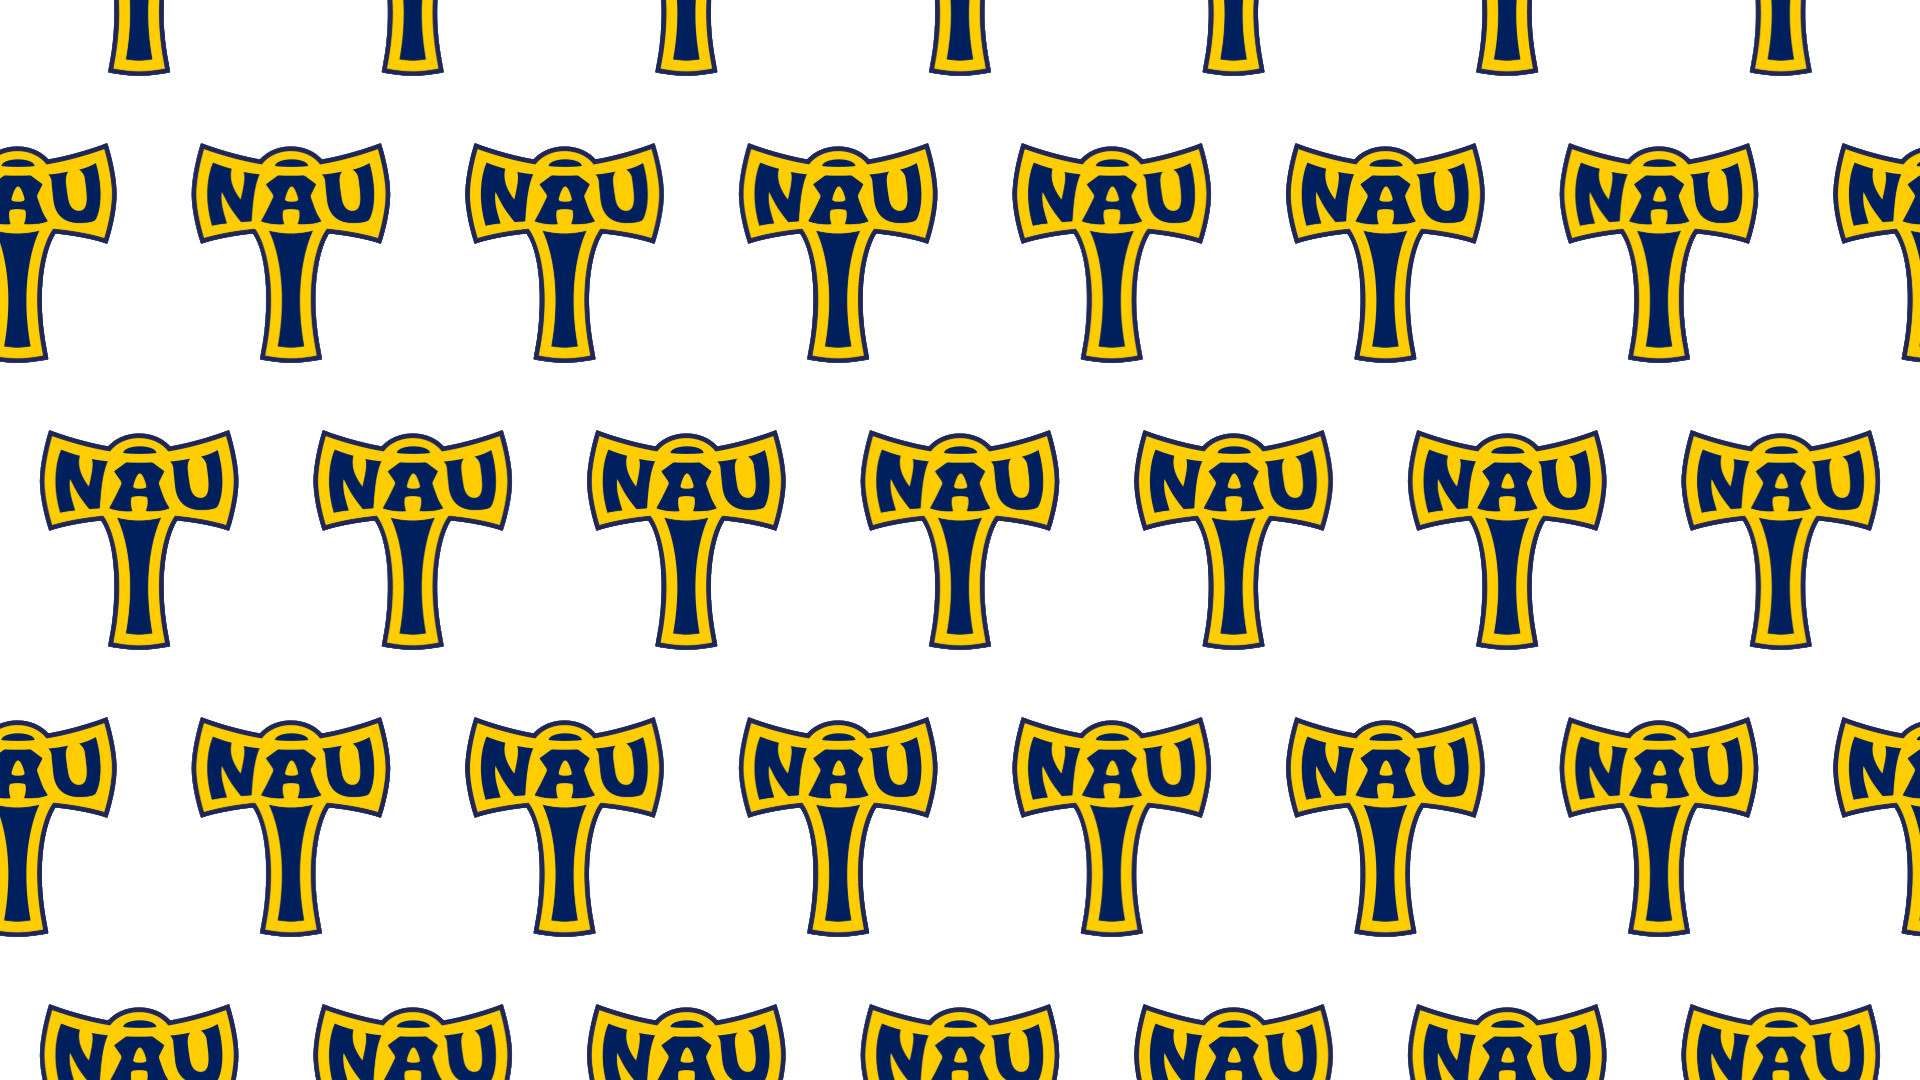 Northern Arizona University's 1978 Axe symbol, showcased in the La Cuesta Collection by College Vault.